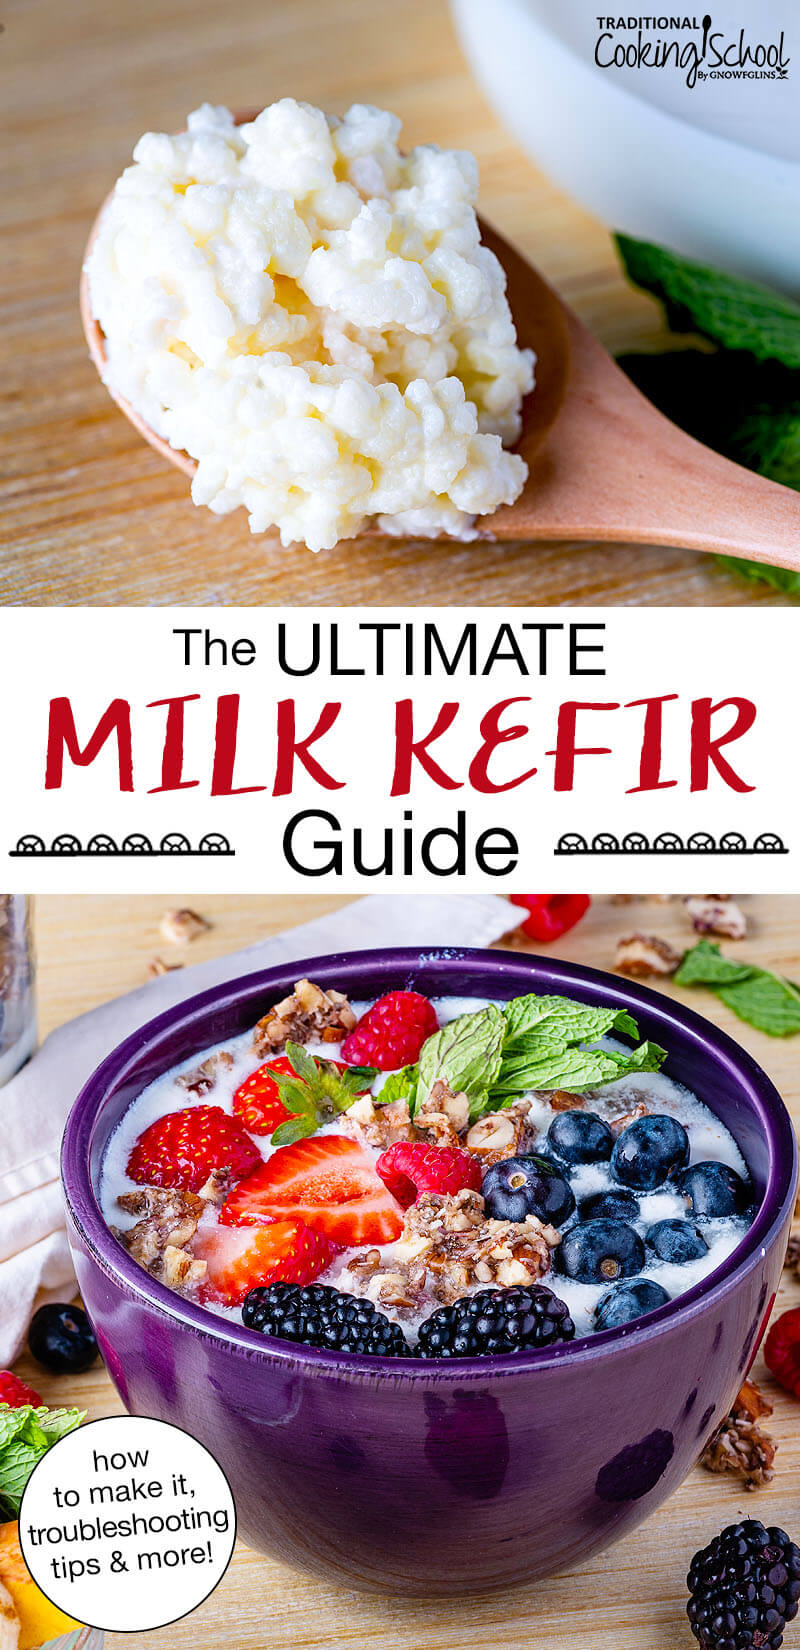 Photo collage of a wooden spoon of dairy kefir grains, and finished kefir in a bowl topped with granola and fresh berries. Text overlay says: "The ULTIMATE Milk Kefir Guide (how to make it, troubleshooting tips & more!)"